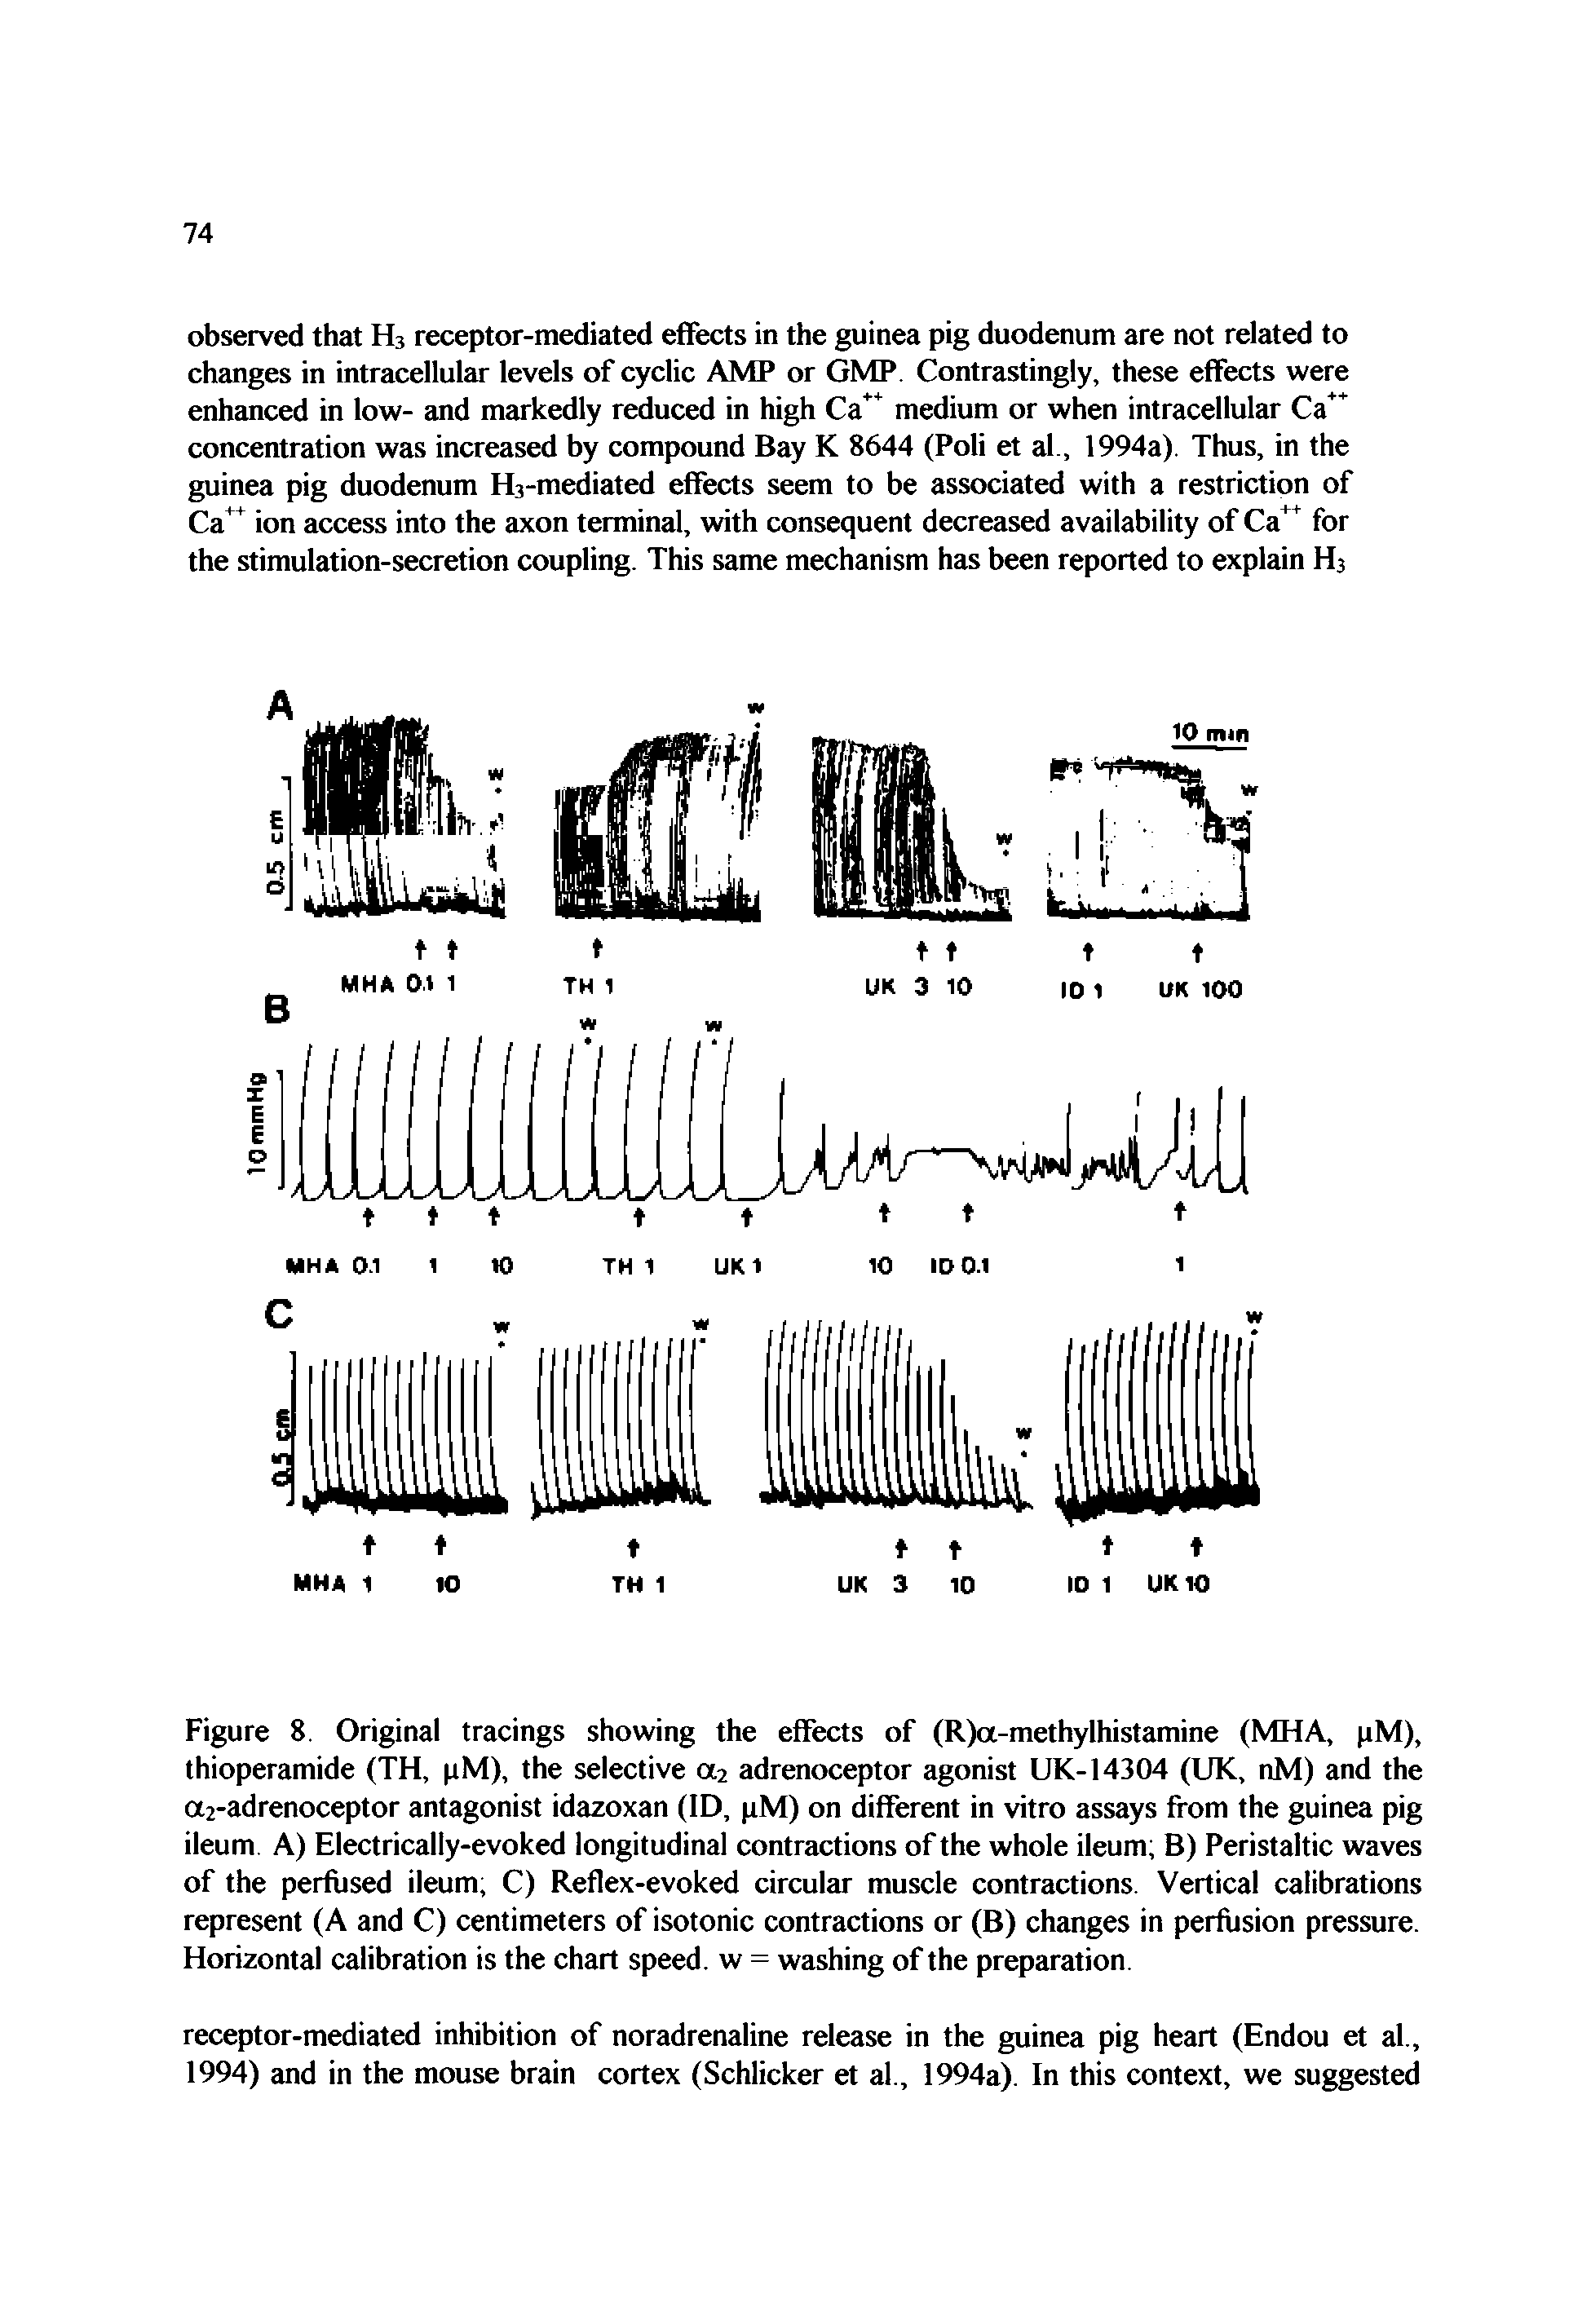 Figure 8. Original tracings showing the effects of (R)a-methylhistamine (MHA, pM), thioperamide (TH, pM), the selective a2 adrenoceptor agonist UK-14304 (UK, nM) and the a2-adrenoceptor antagonist idazoxan (ID, pM) on different in vitro assays from the guinea pig ileum A) Electrically-evoked longitudinal contractions of the whole ileum B) Peristaltic waves of the perfused ileum, C) Reflex-evoked circular muscle contractions Vertical calibrations represent (A and C) centimeters of isotonic contractions or (B) changes in perfusion pressure. Horizontal calibration is the chart speed, w = washing of the preparation...